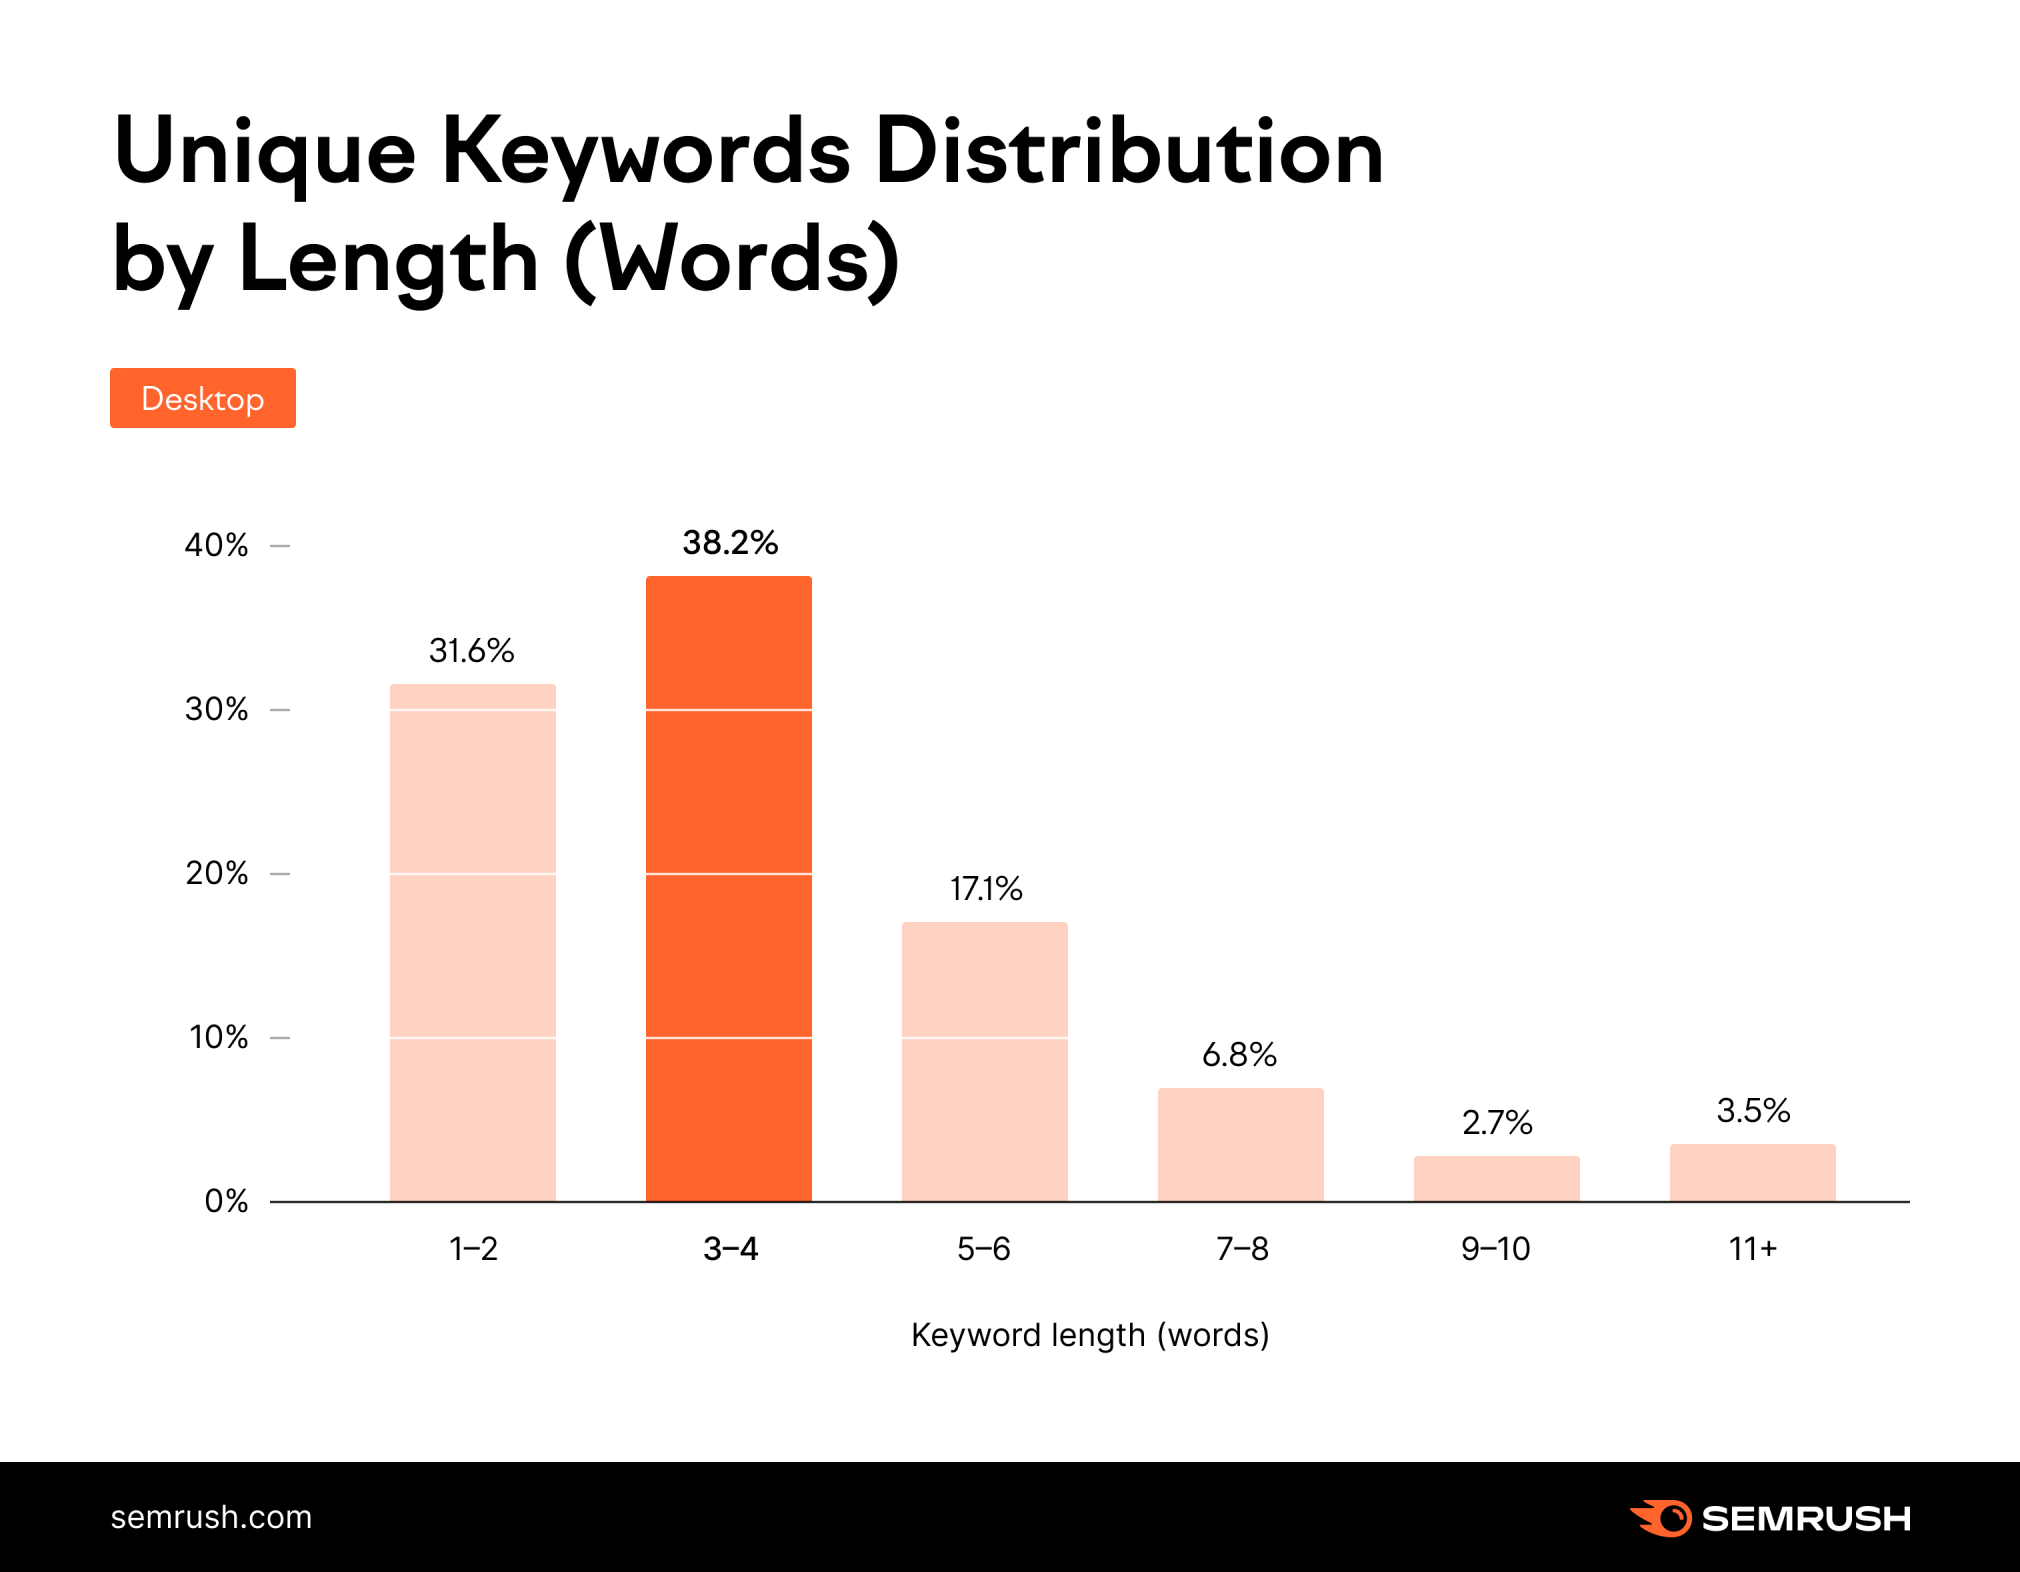 Google search statistics: stacked bar graph showing unique keywords distribution by length in desktop searches